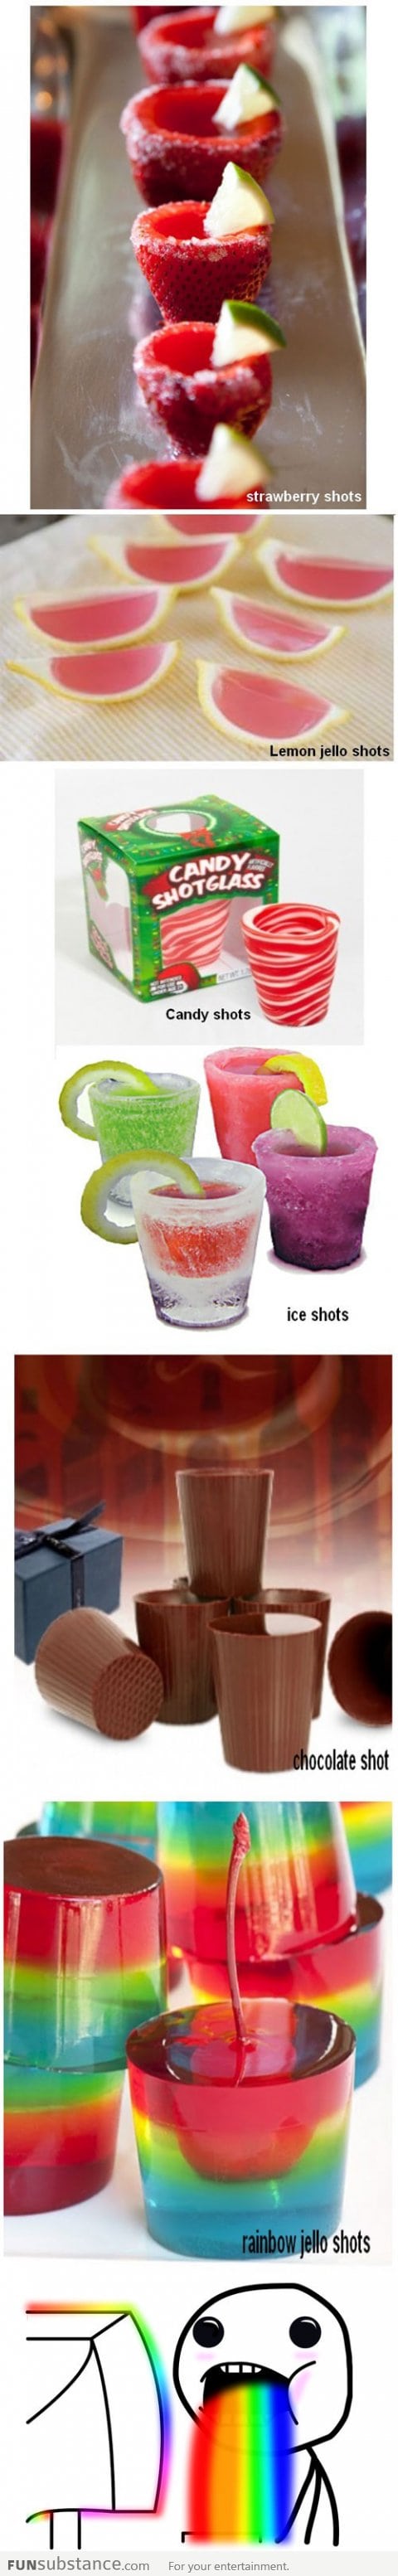 Types of shots